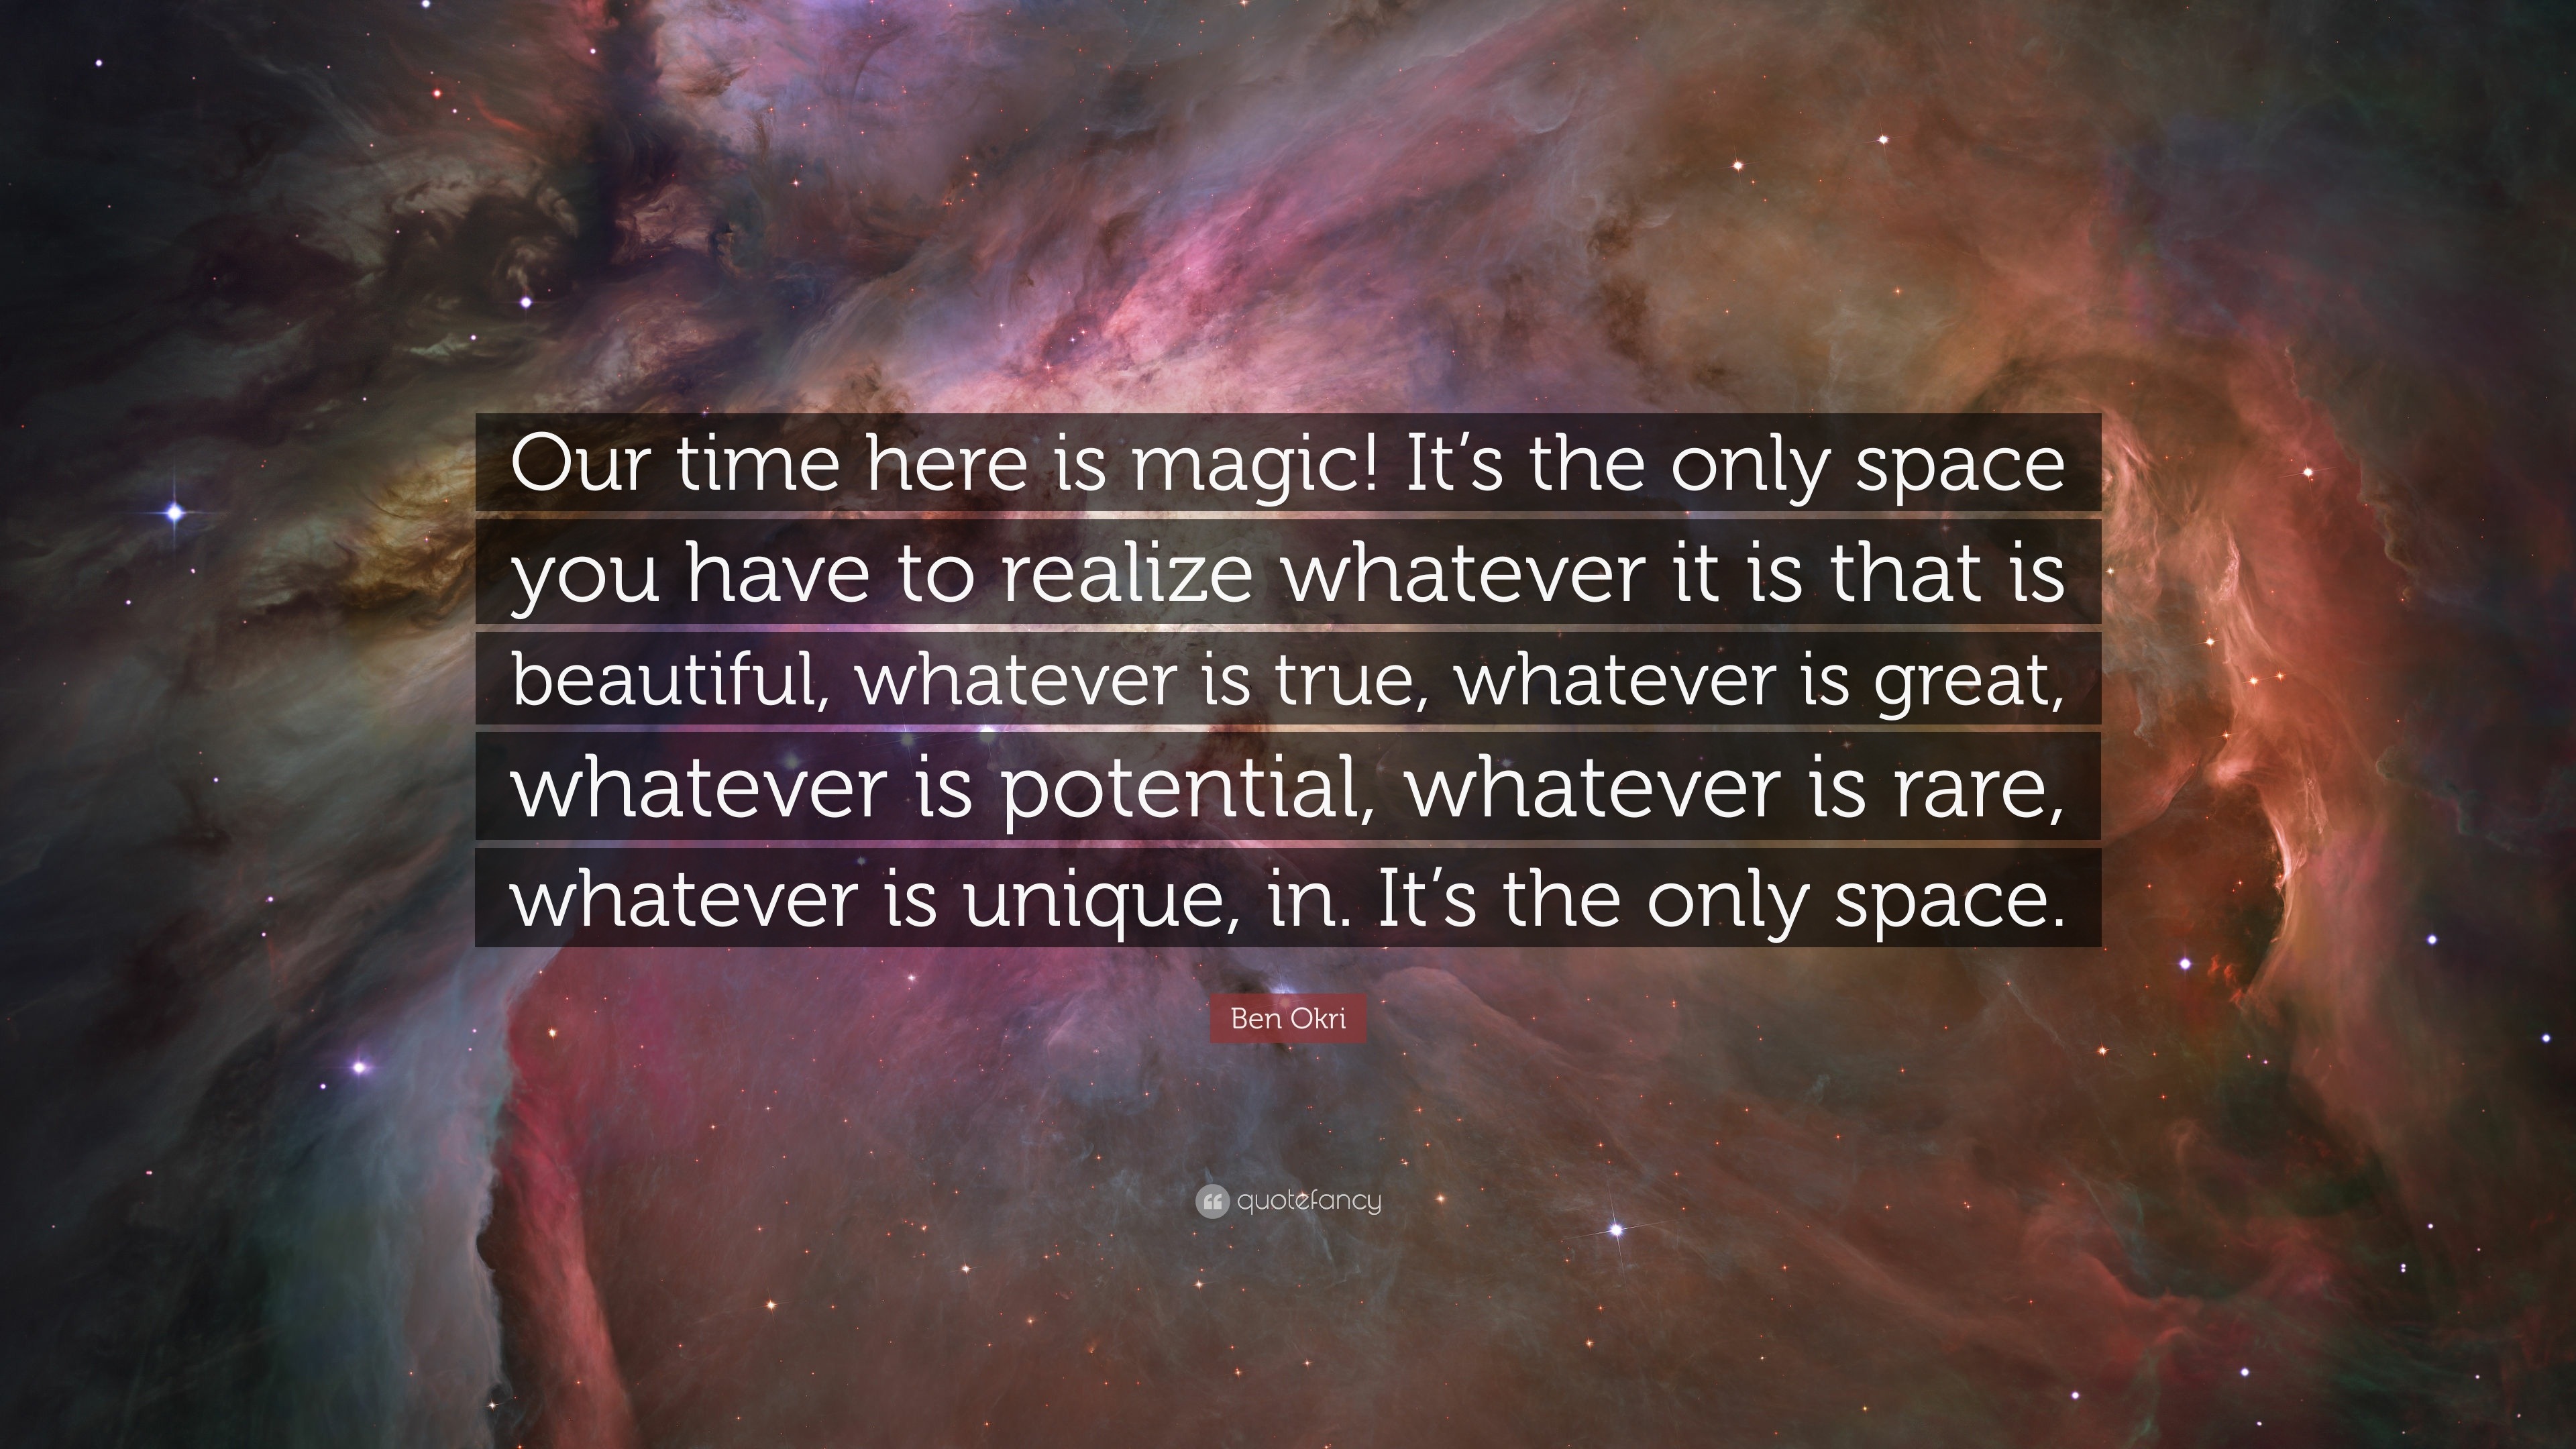 Ben Okri Quote: “Our time here is magic! It’s the only space you have ...